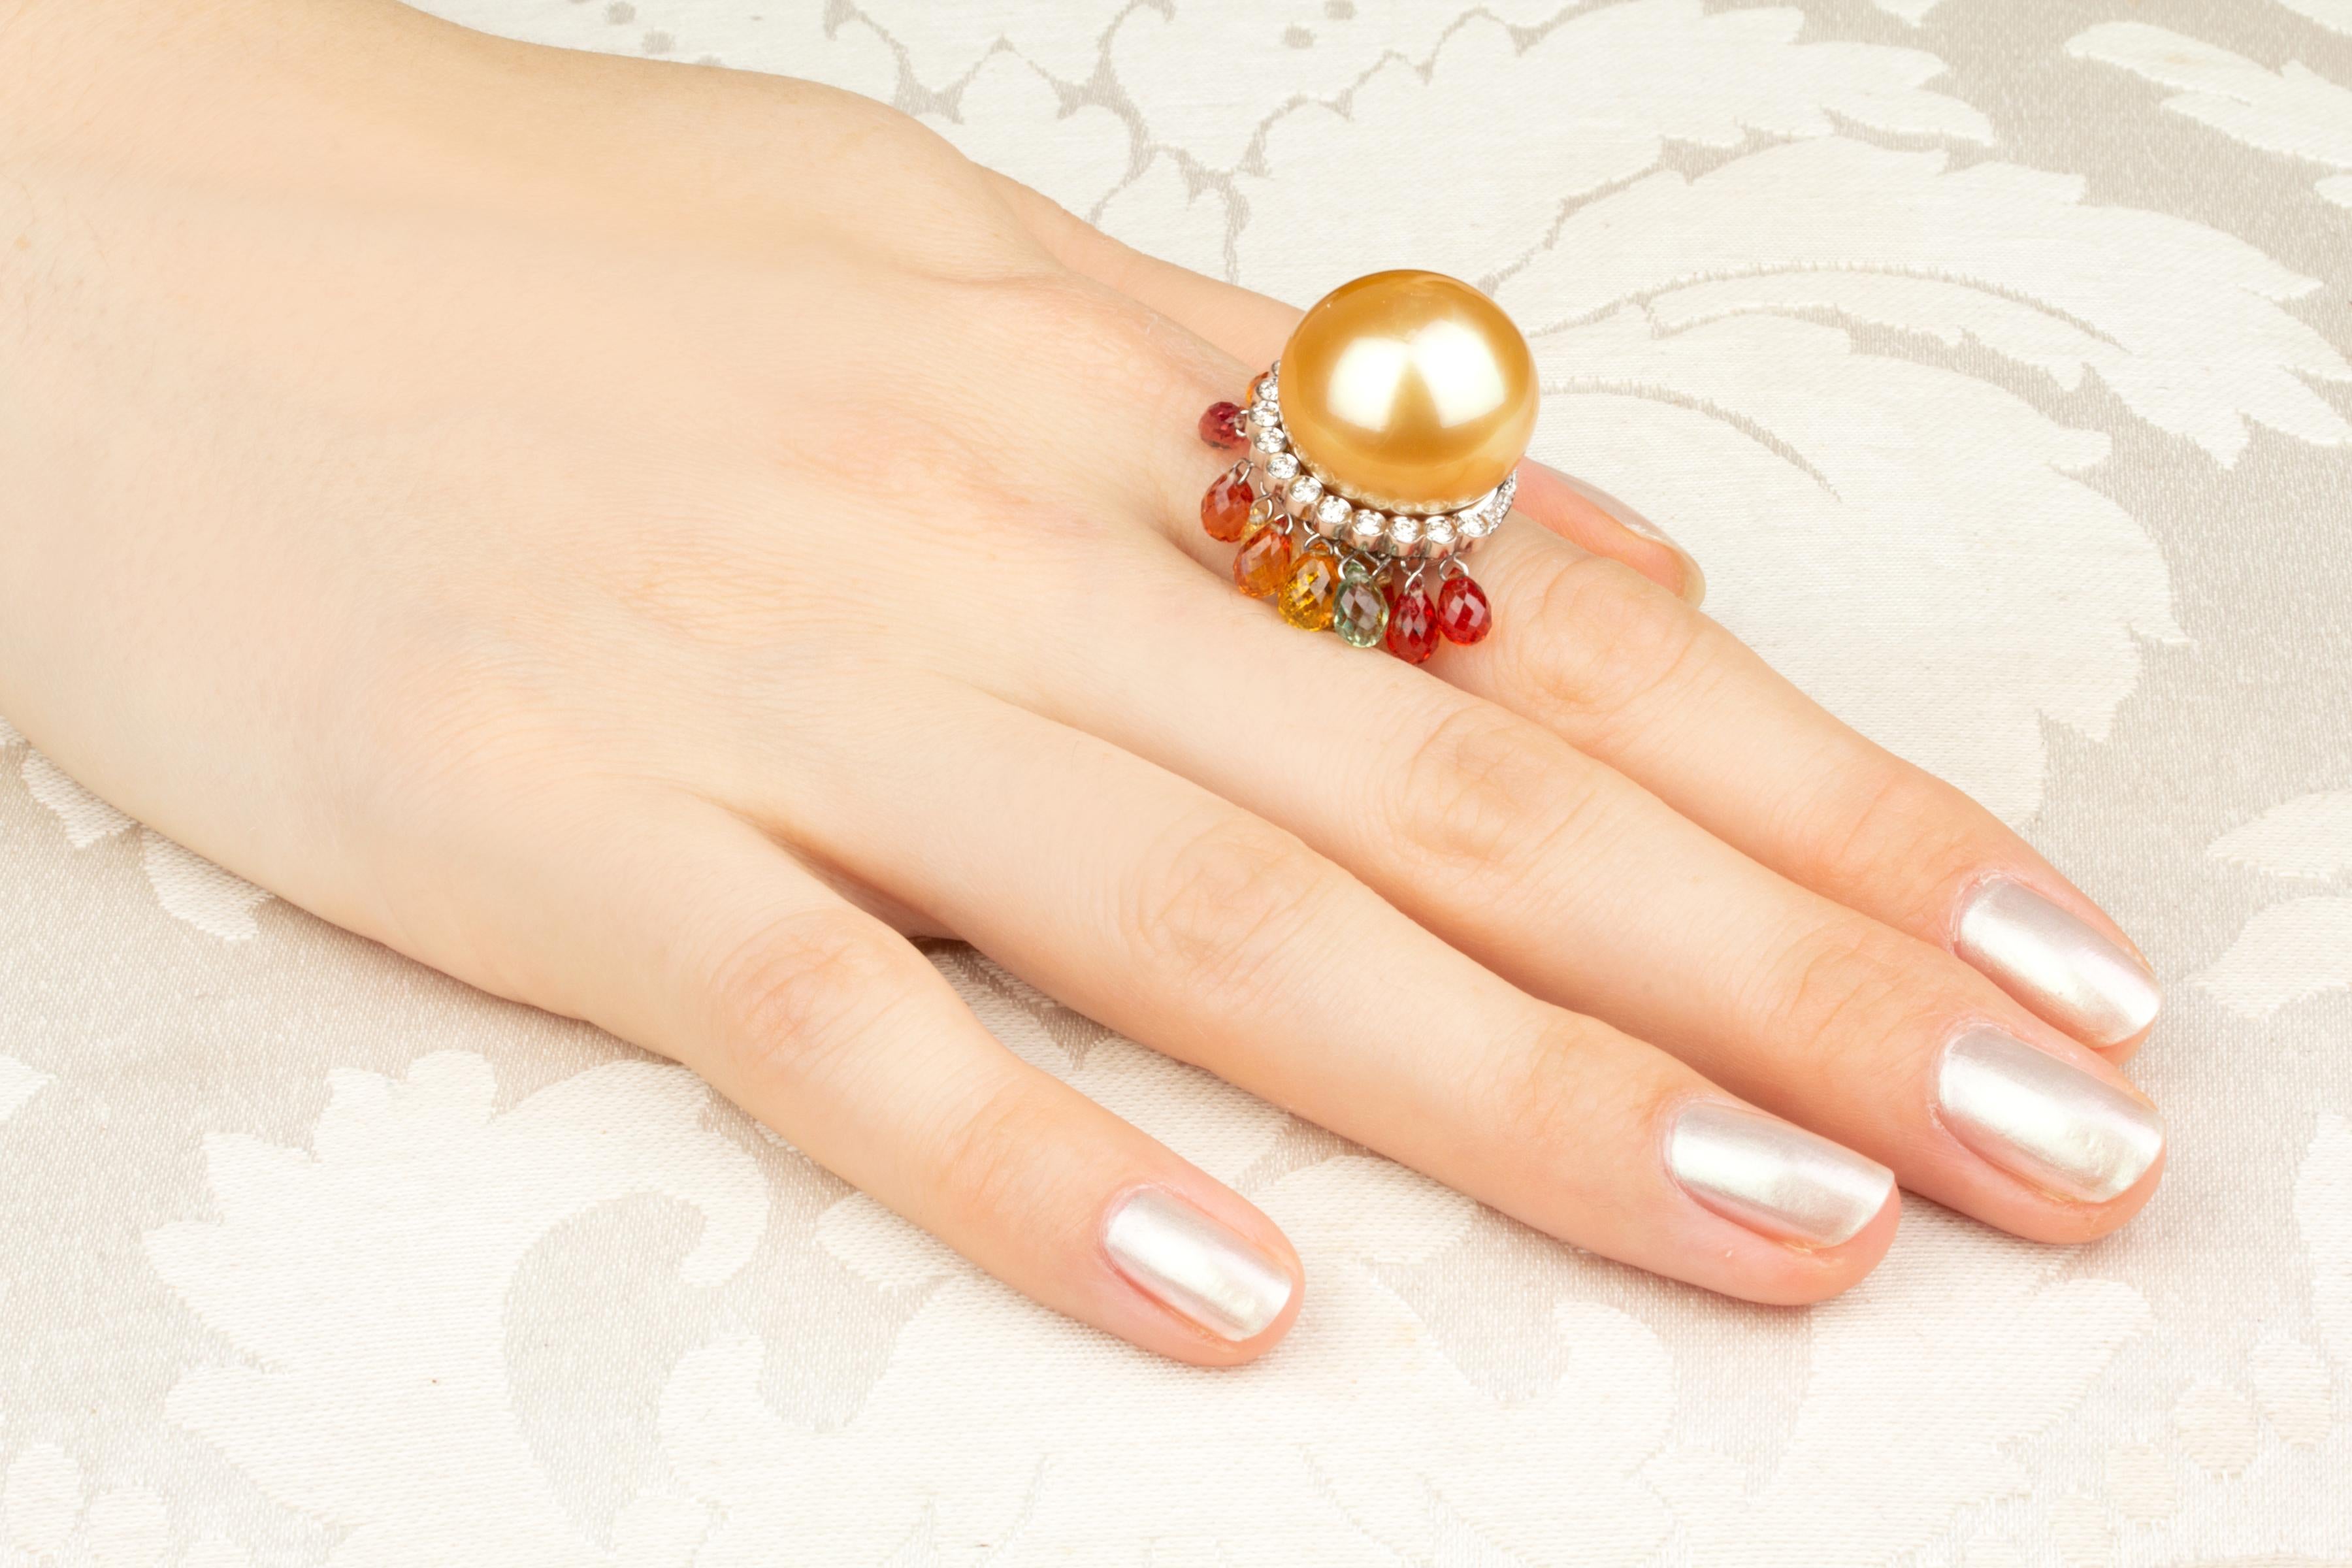 This golden pearl and diamond cocktail ring features a splendid pearl of the rare size of 18mm diameter. The pearl is untreated. It displays a fine nacre and its natural color and luster have not been enhanced in any way. The pearl is perched on a